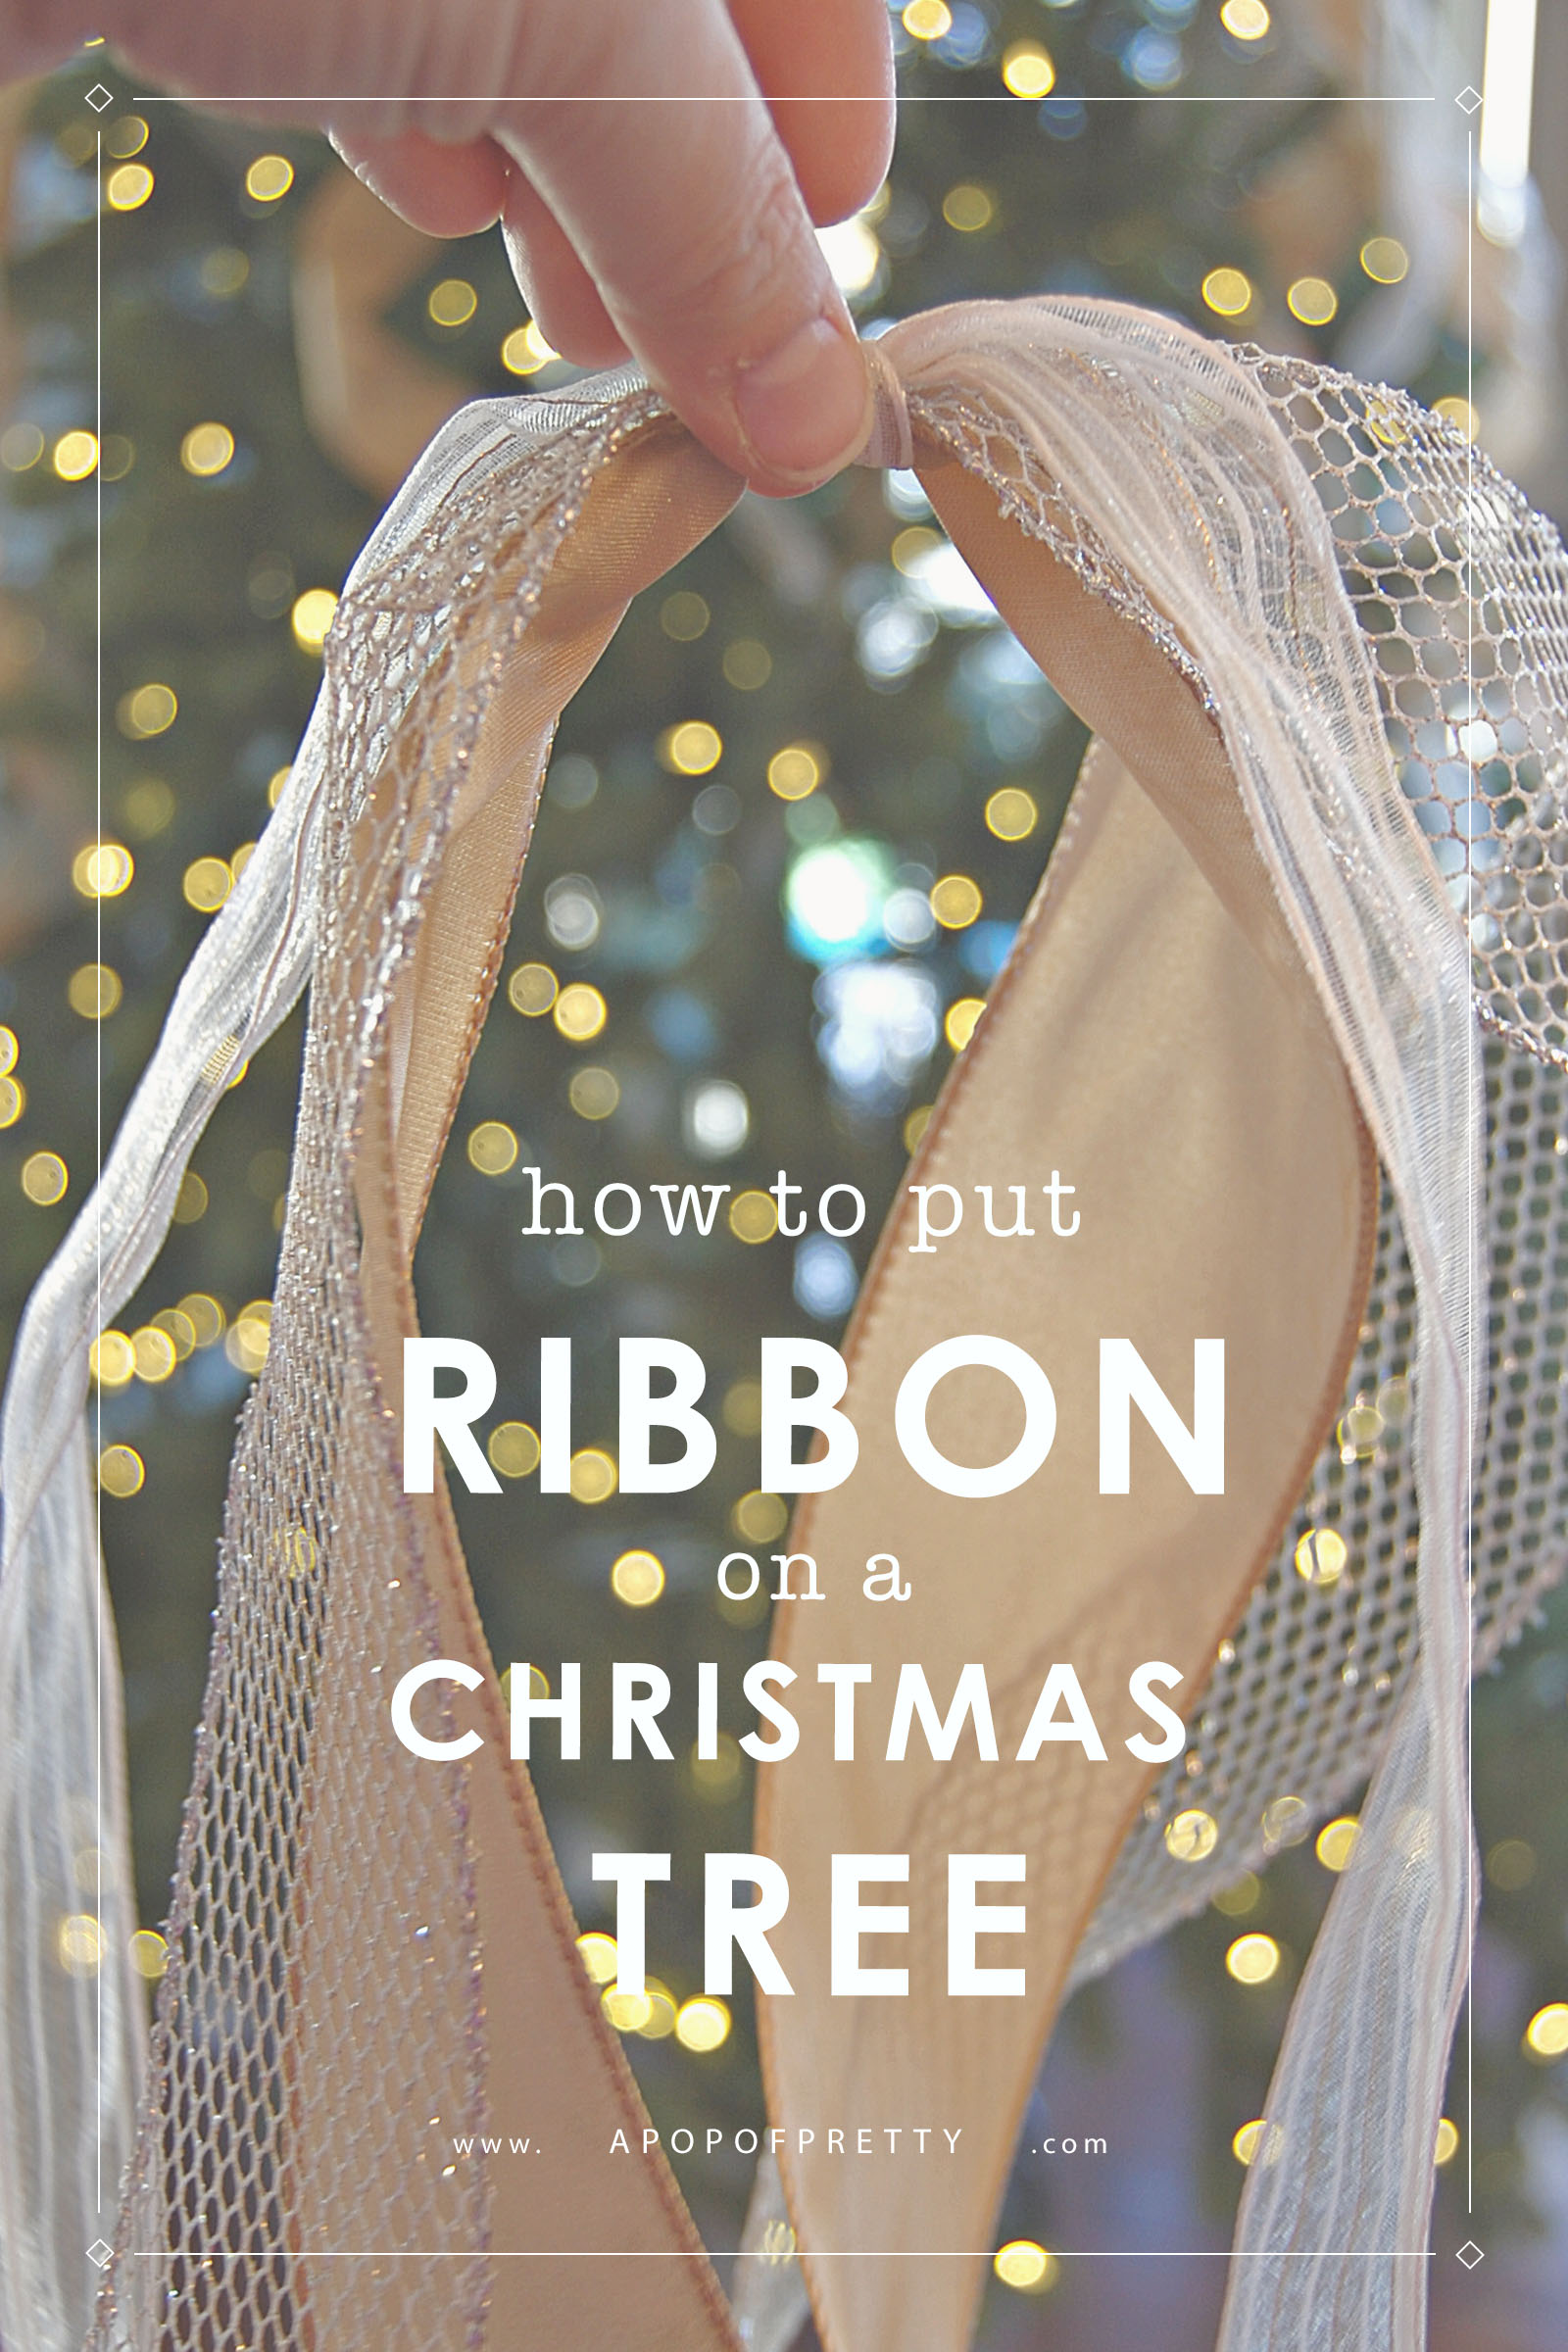 how to decorate a Christmas tree professionally with ribbon